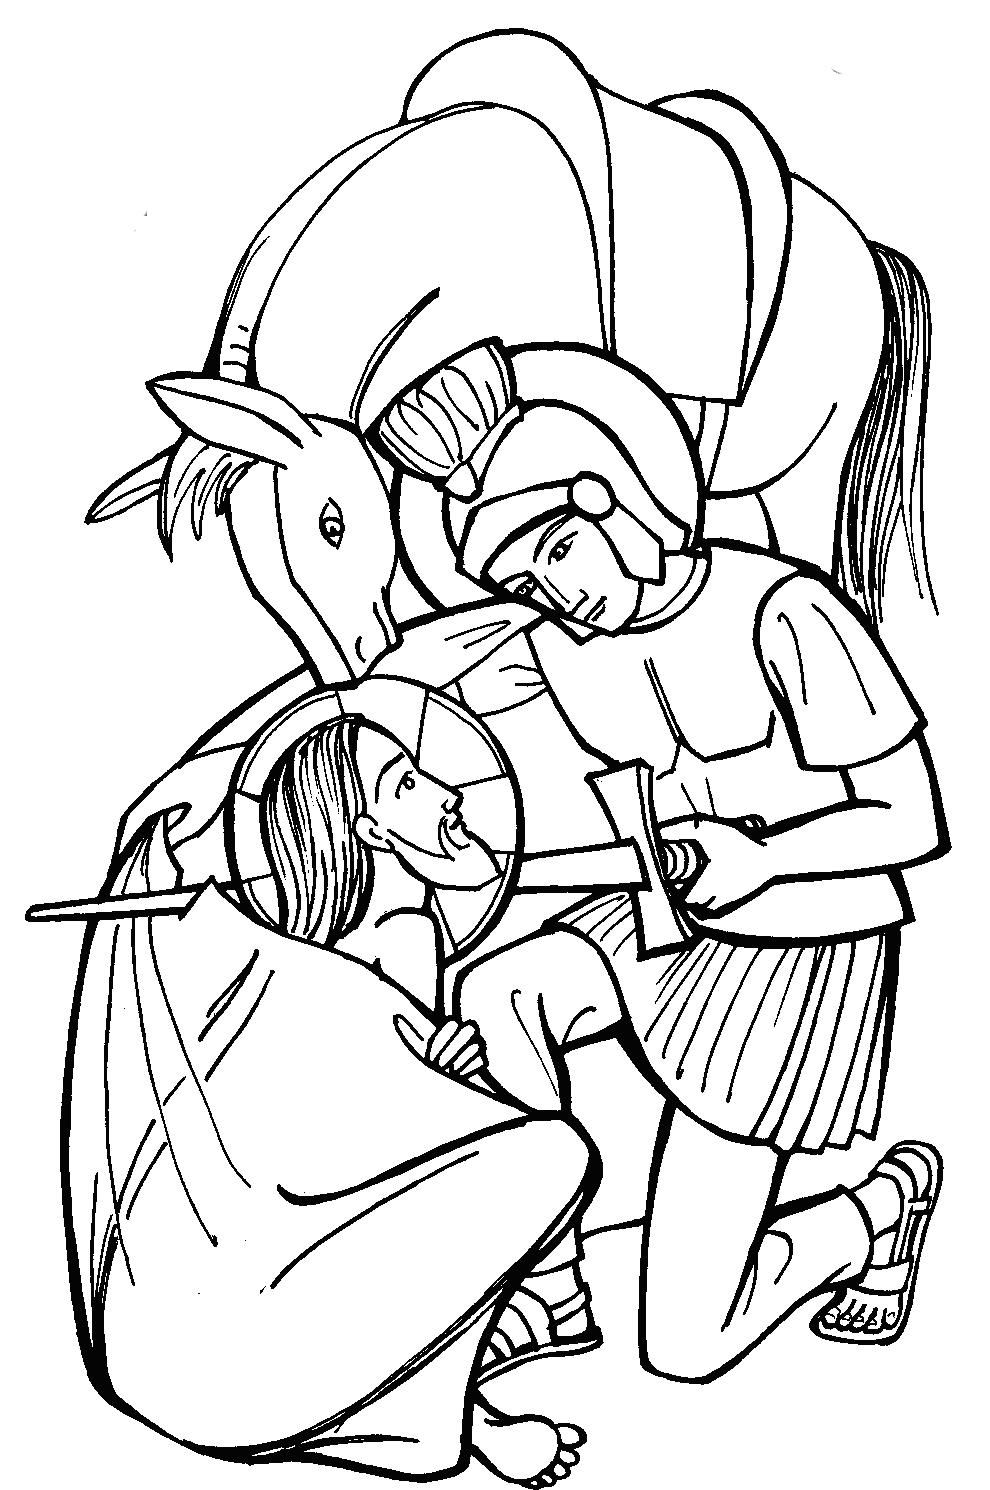 St martin of tours catholic coloring pagefeast day martinmas is november th coloriage st martin de tours masque de dinosaure